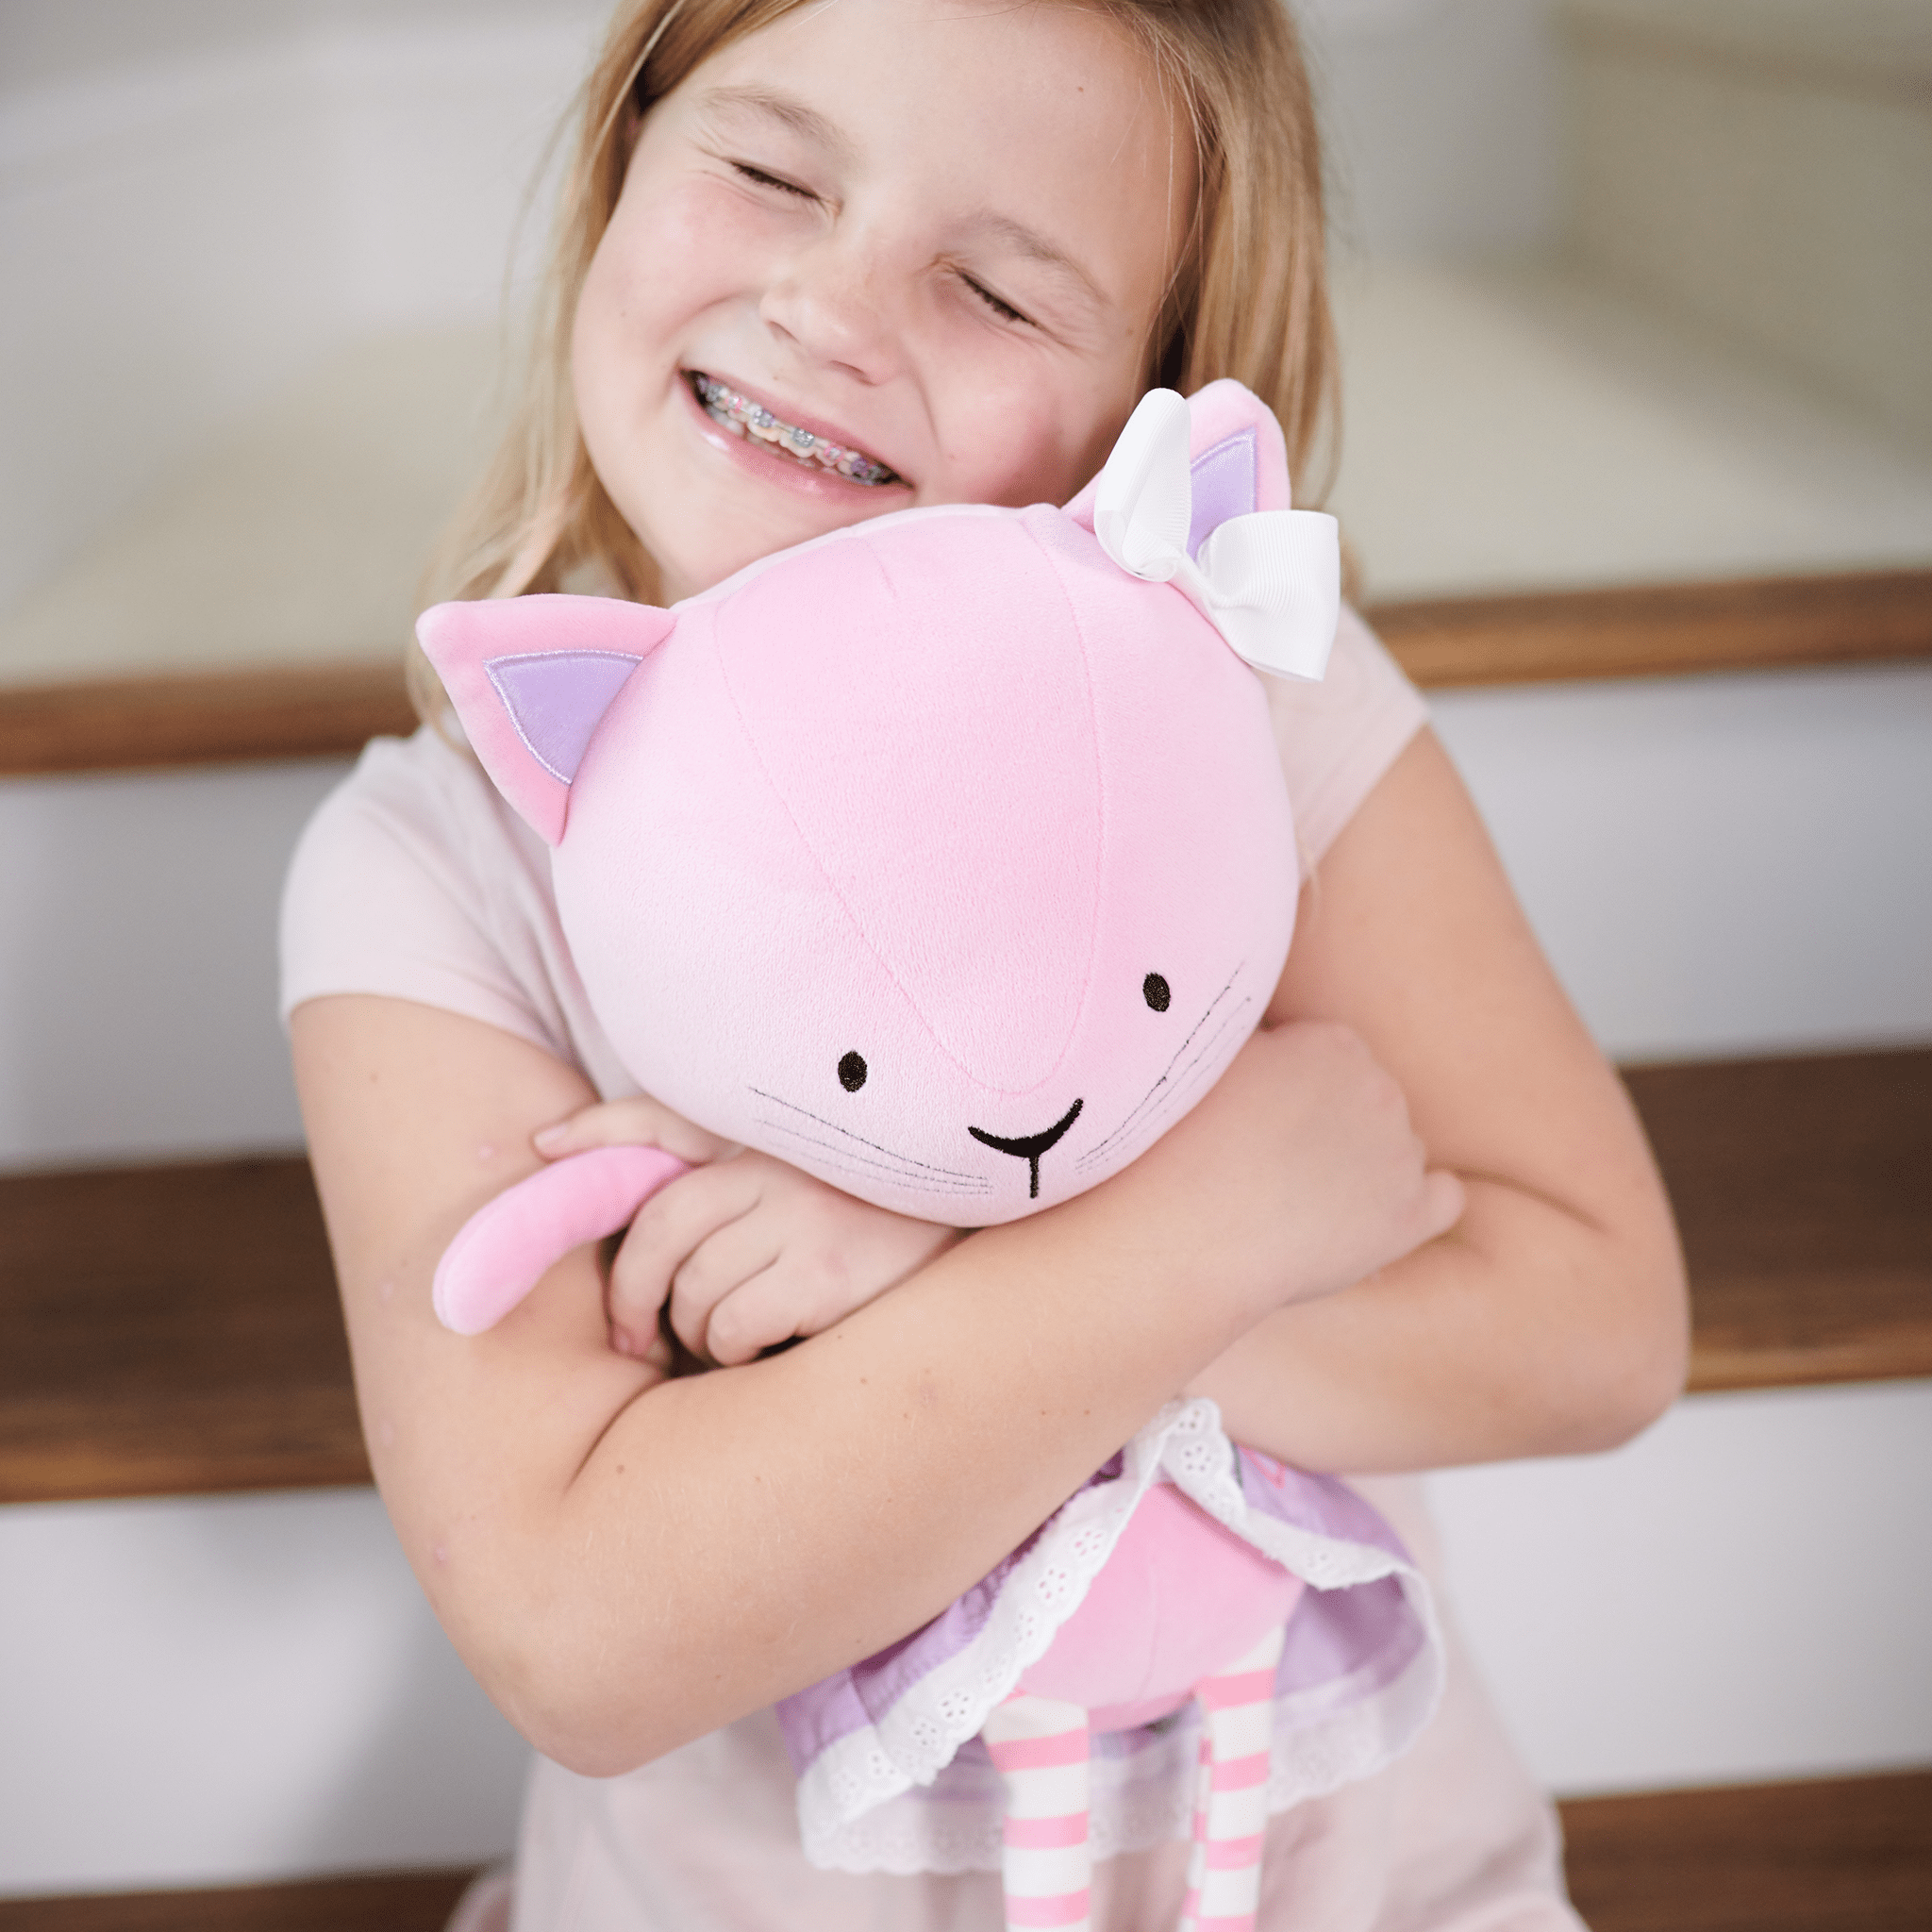 Lucy Kitty Plush Doll With Dress